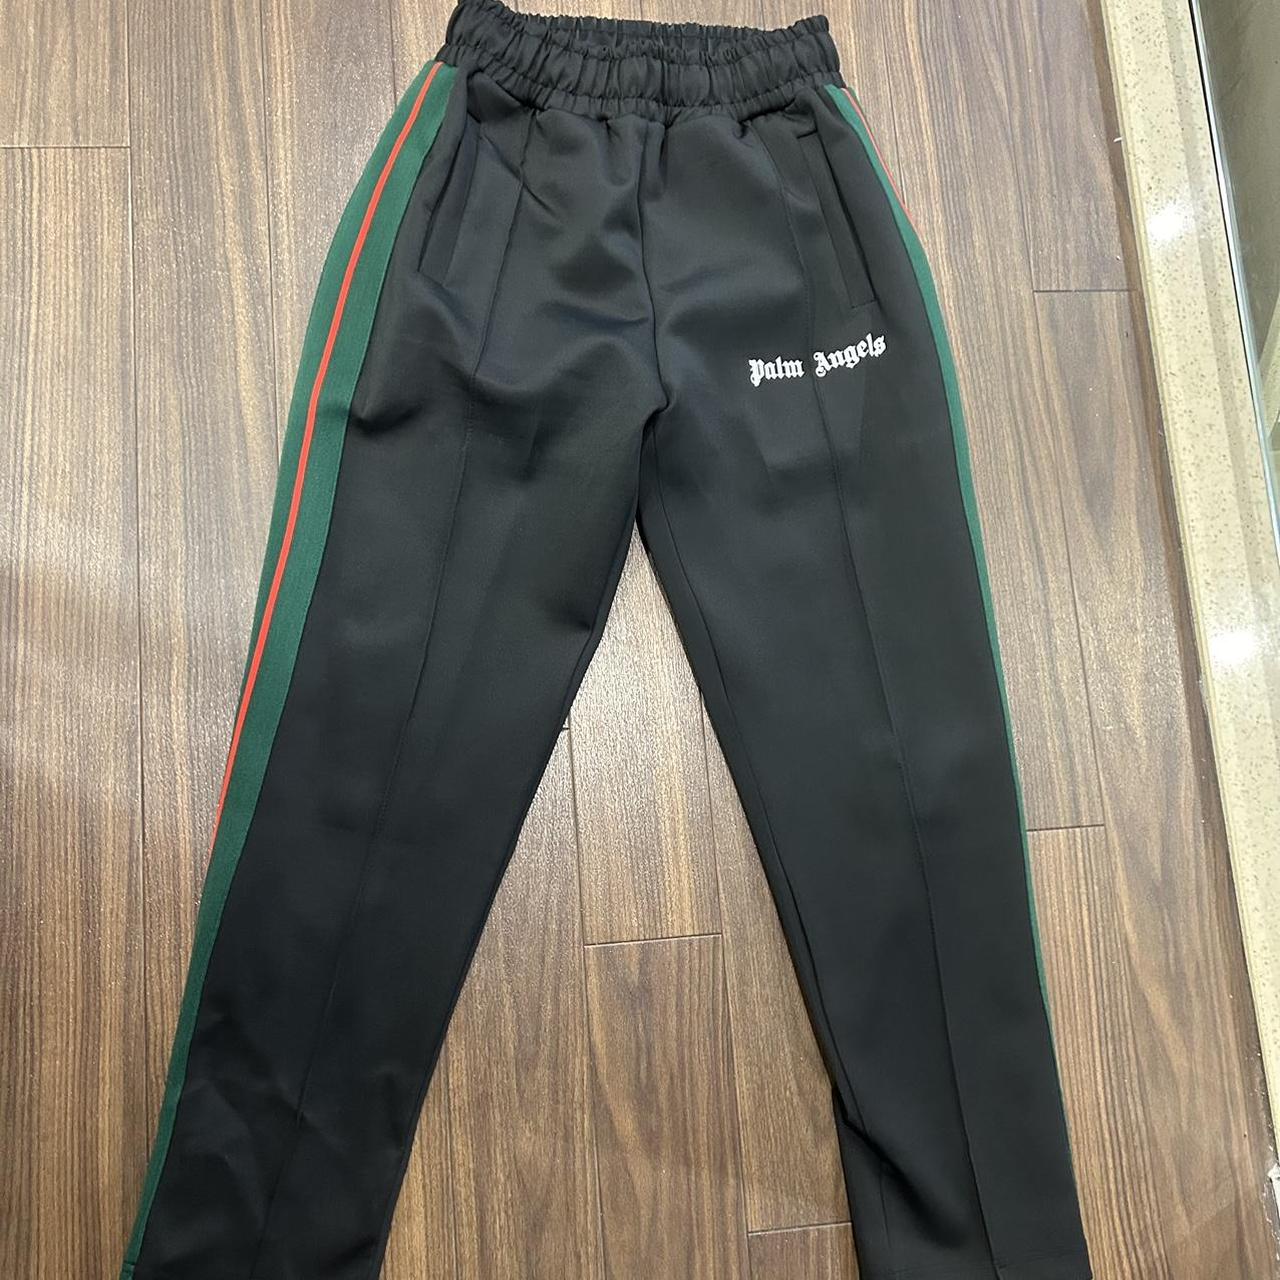 Palm angels track bottoms Black with green and red... - Depop